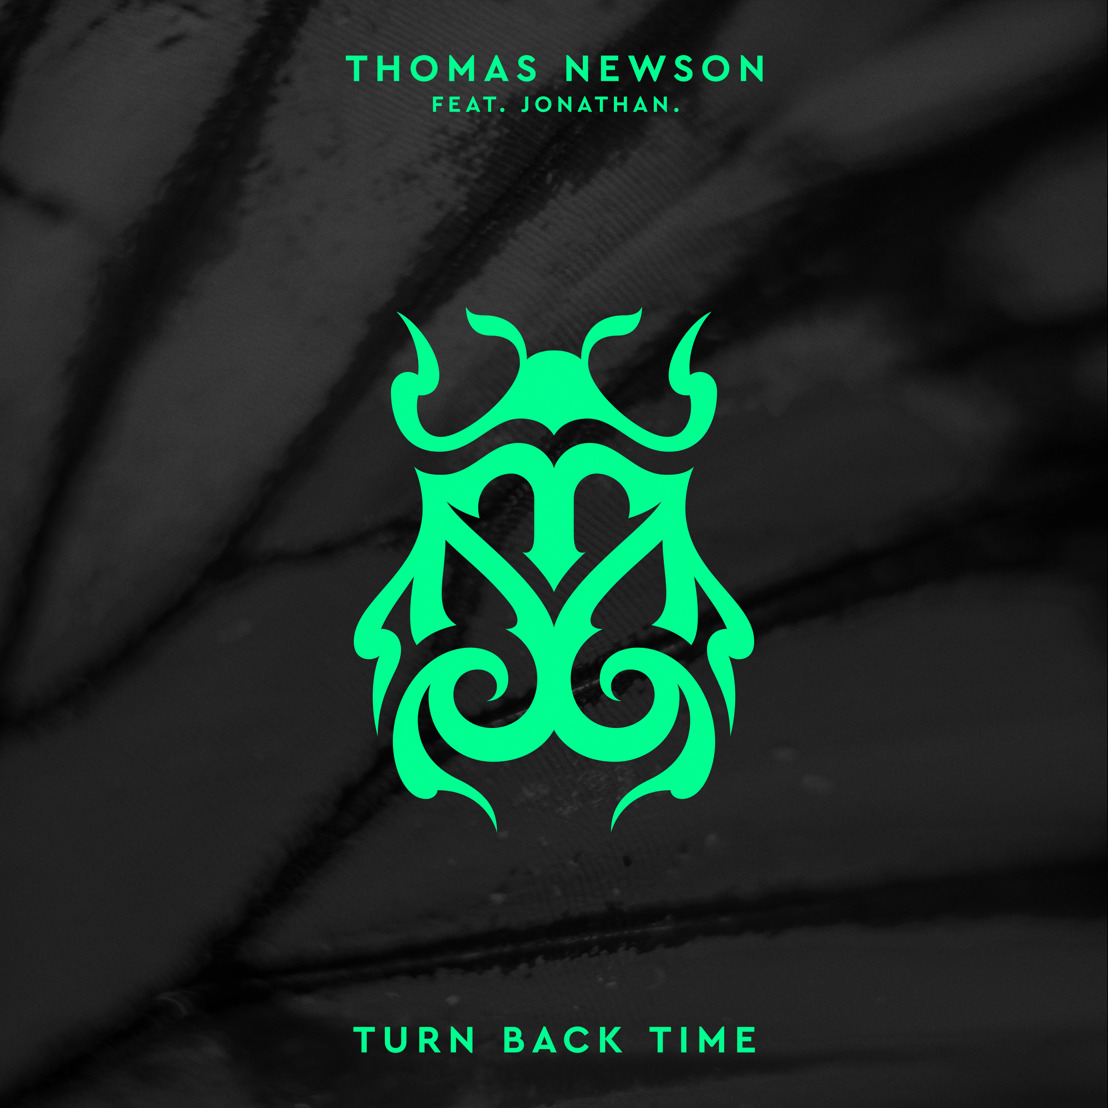 Thomas Newson joins Tomorrowland Music with ‘Turn Back Time’